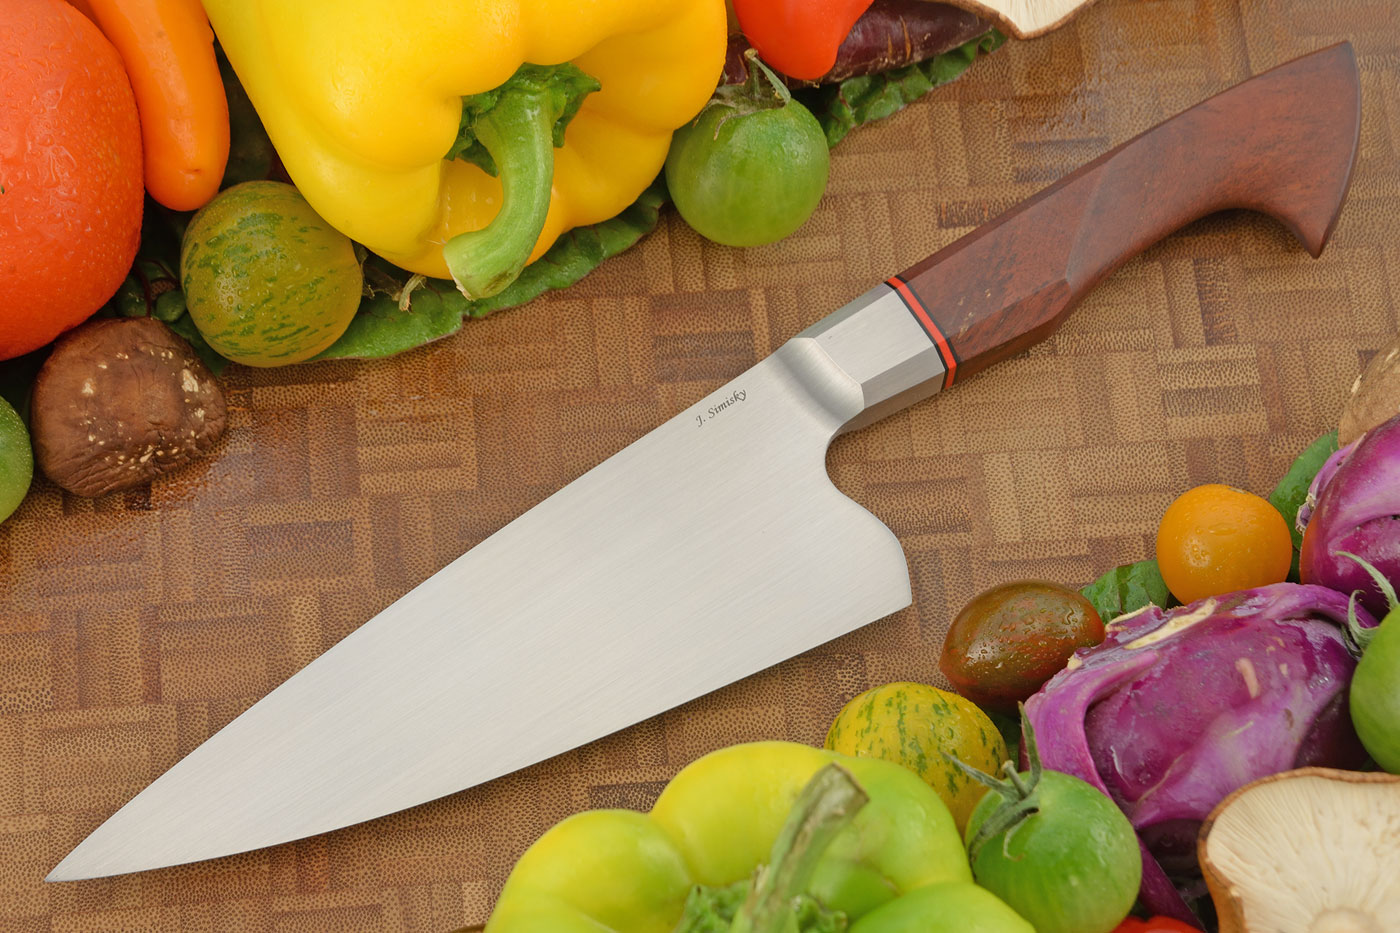 Integral Chef's Knife with Lychee<br>Journeyman Smith Test Knife